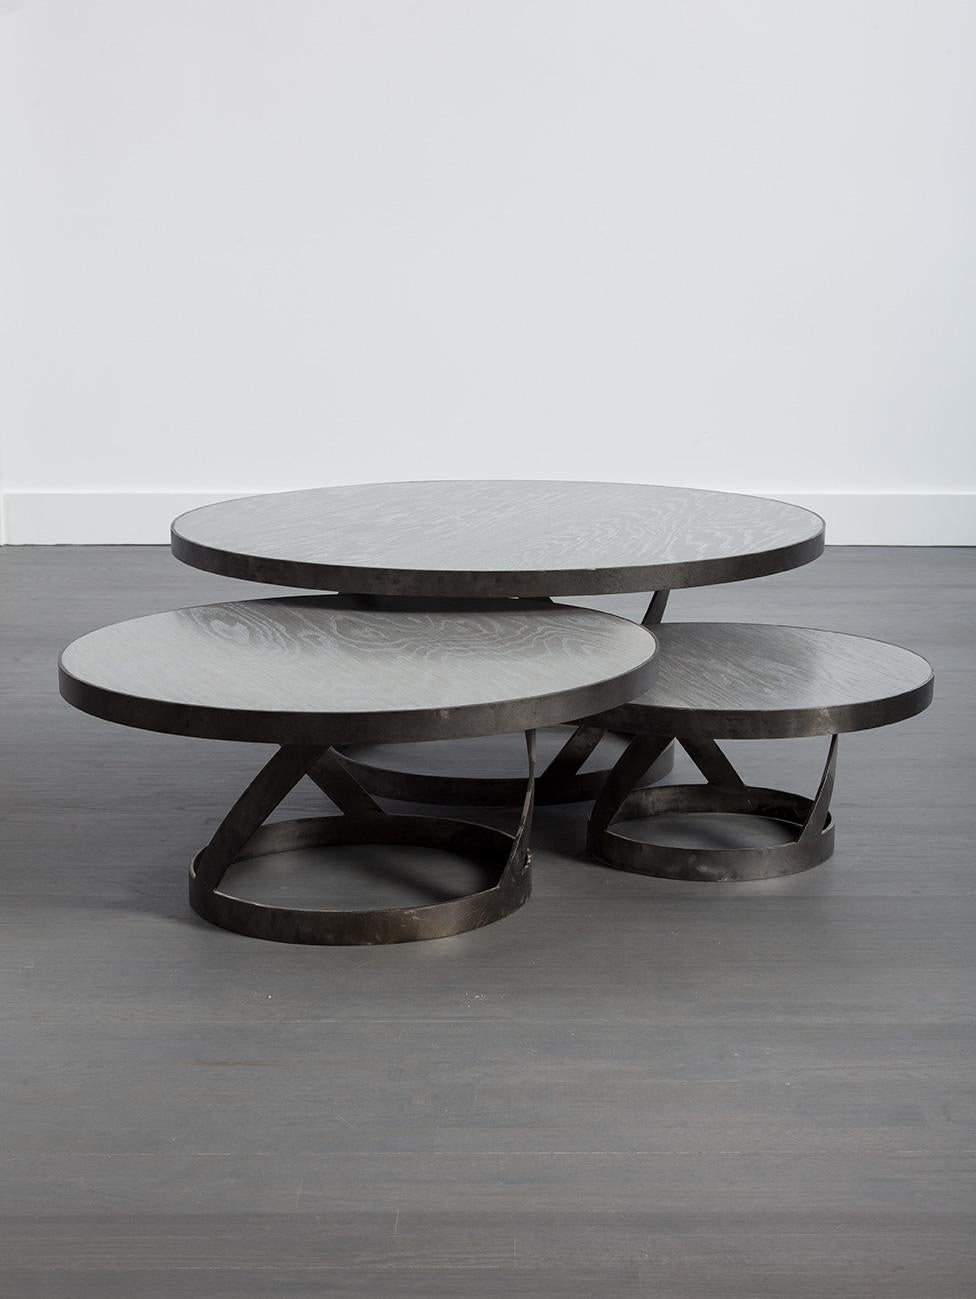 This versatile modern oak coffee table with a blackened steel spiral base provides great interest for the family or living room. Shown is the 42 inch diameter table top. The table also comes in 31 and 24 inch diameters and varying heights,